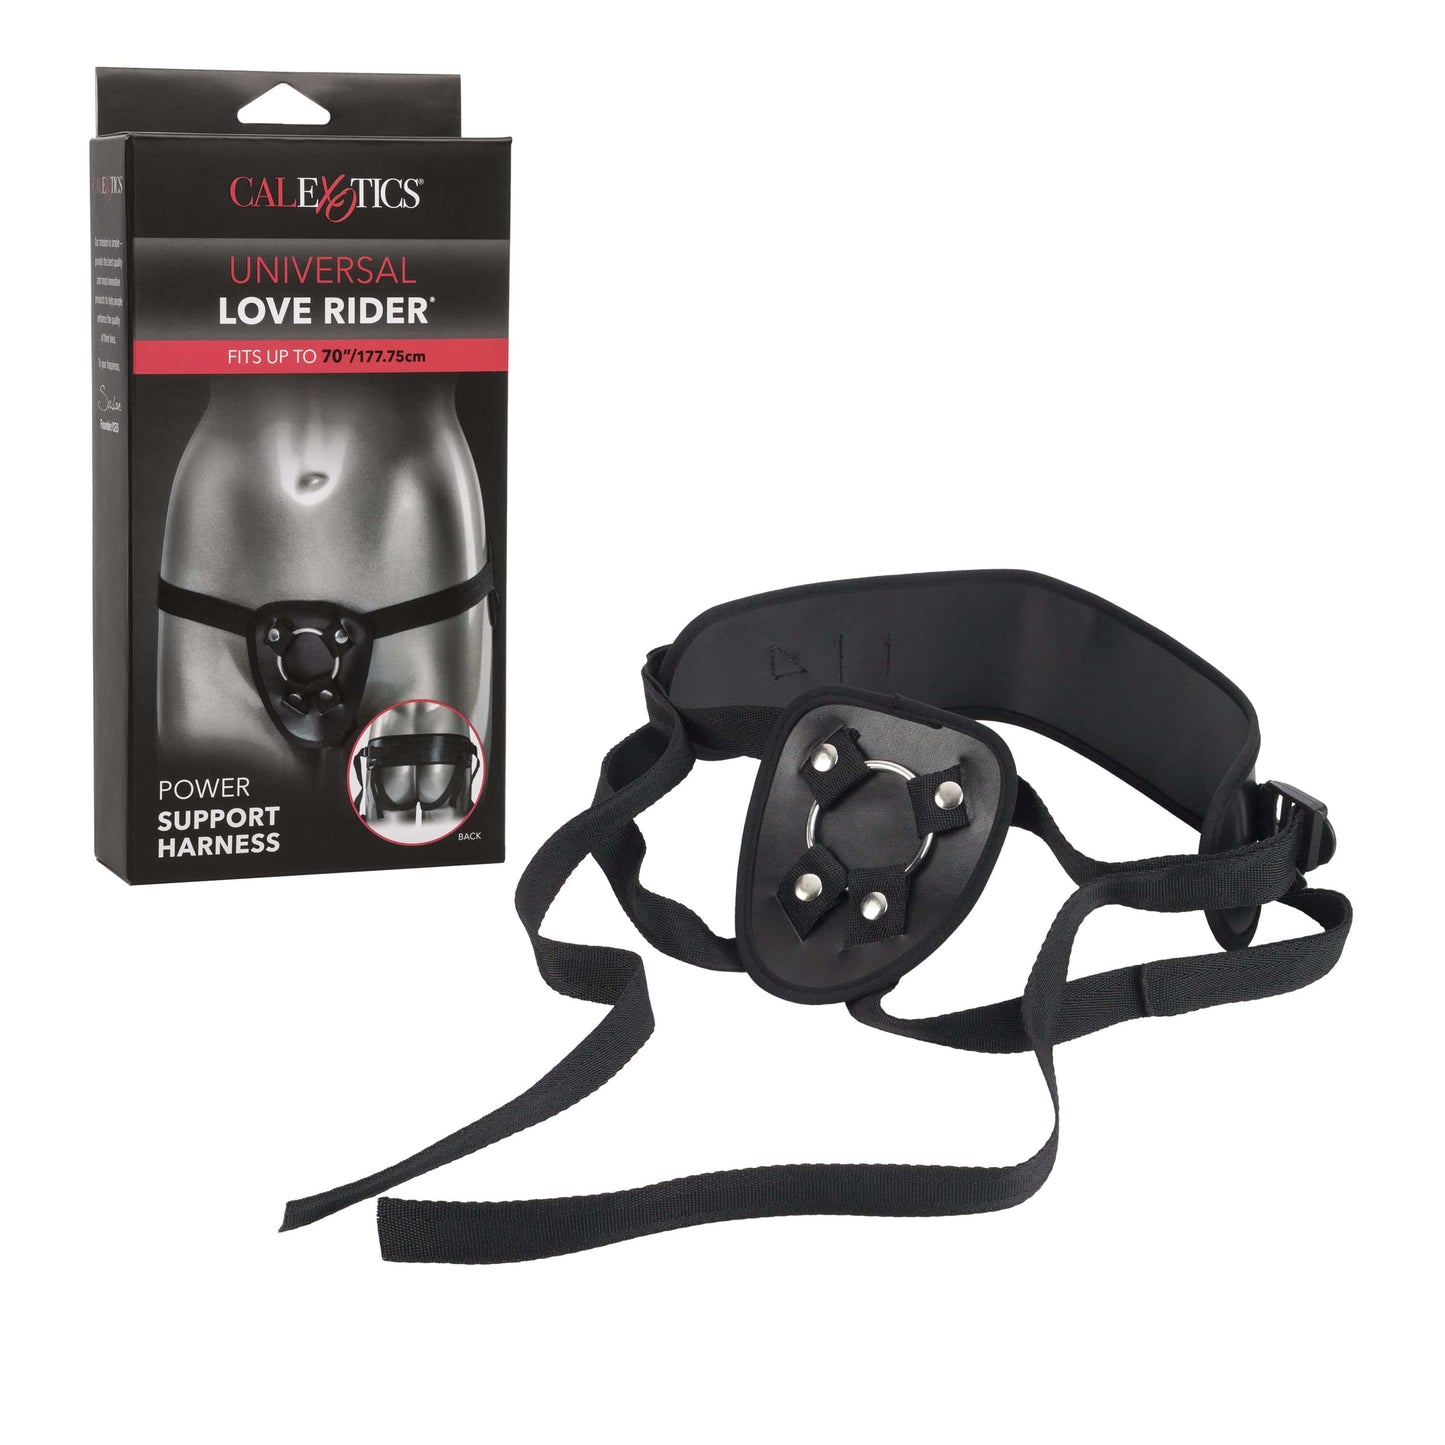 Universal Love Rider Power Support Harness - Thorn & Feather